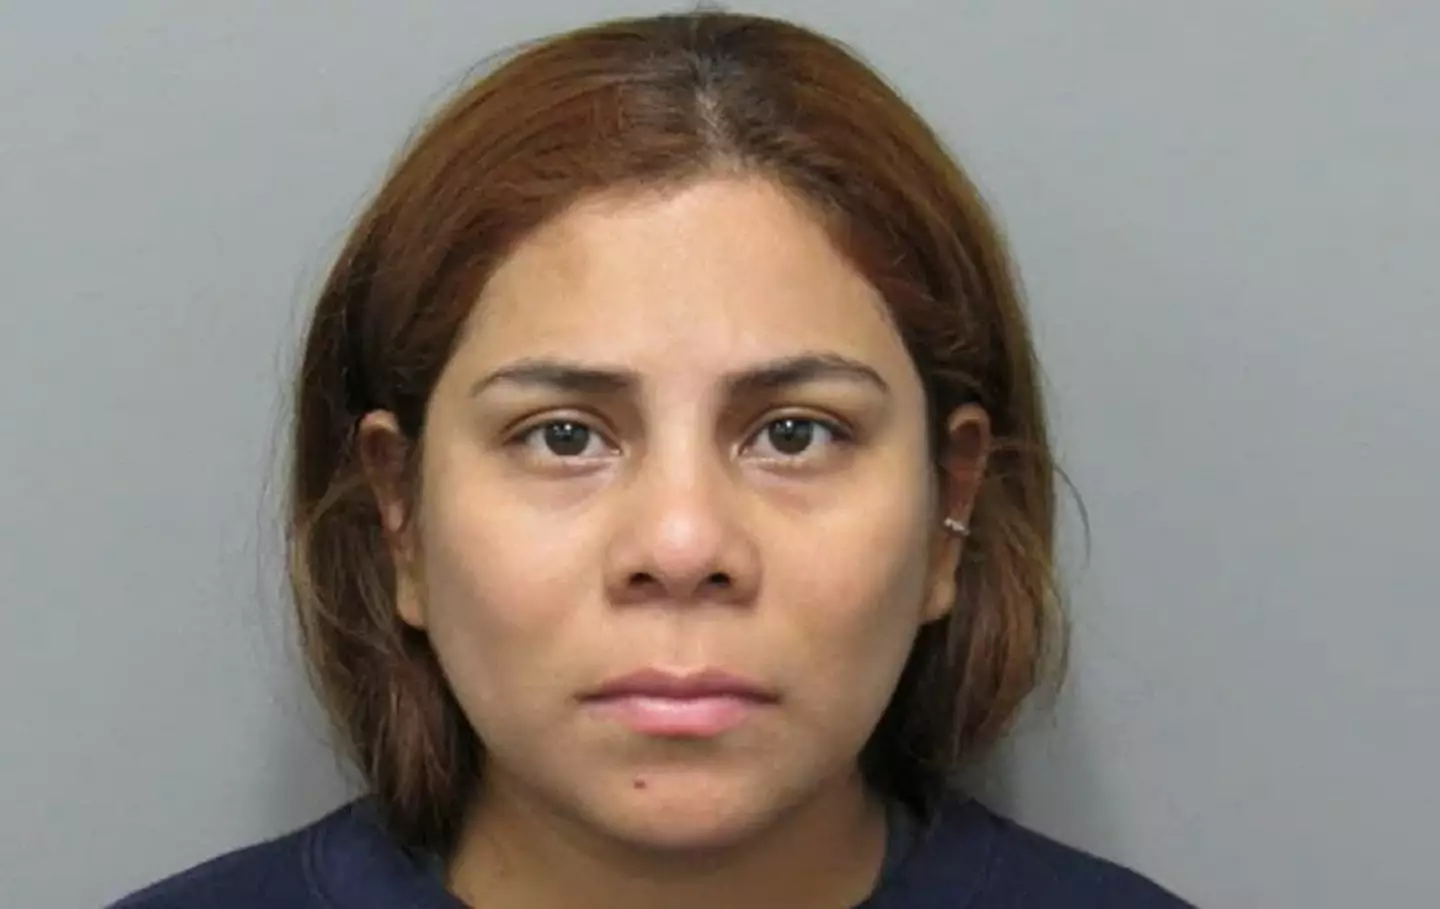 31-year-old Kristel Candelario will face charges of murder.